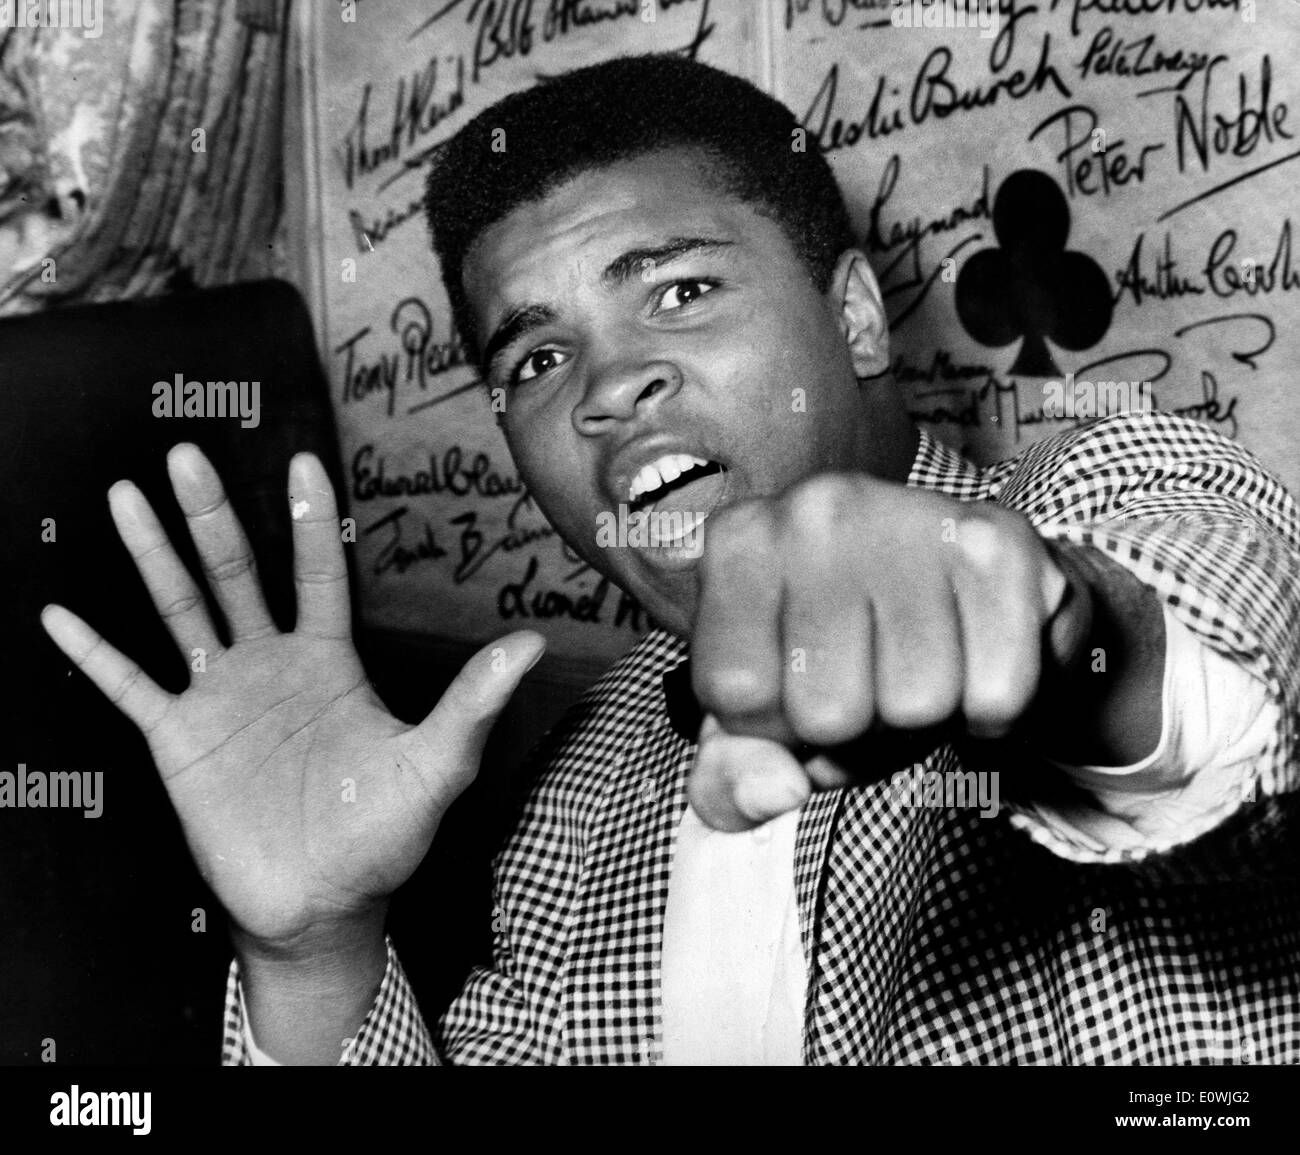 May 27, 1963; London, UK; Loud-mouthed CASSIUS MARCELLUS CLAY, the American heavyweight boxer who's voice is insured for 21, 000 pounds while he is in this country, has arrived to fight Henry Cooper. The picture shows Cassius Clay holding up five fingers to denote which he will knock out Henry Cooper in and also holdss up the first which will do the damage. Stock Photo